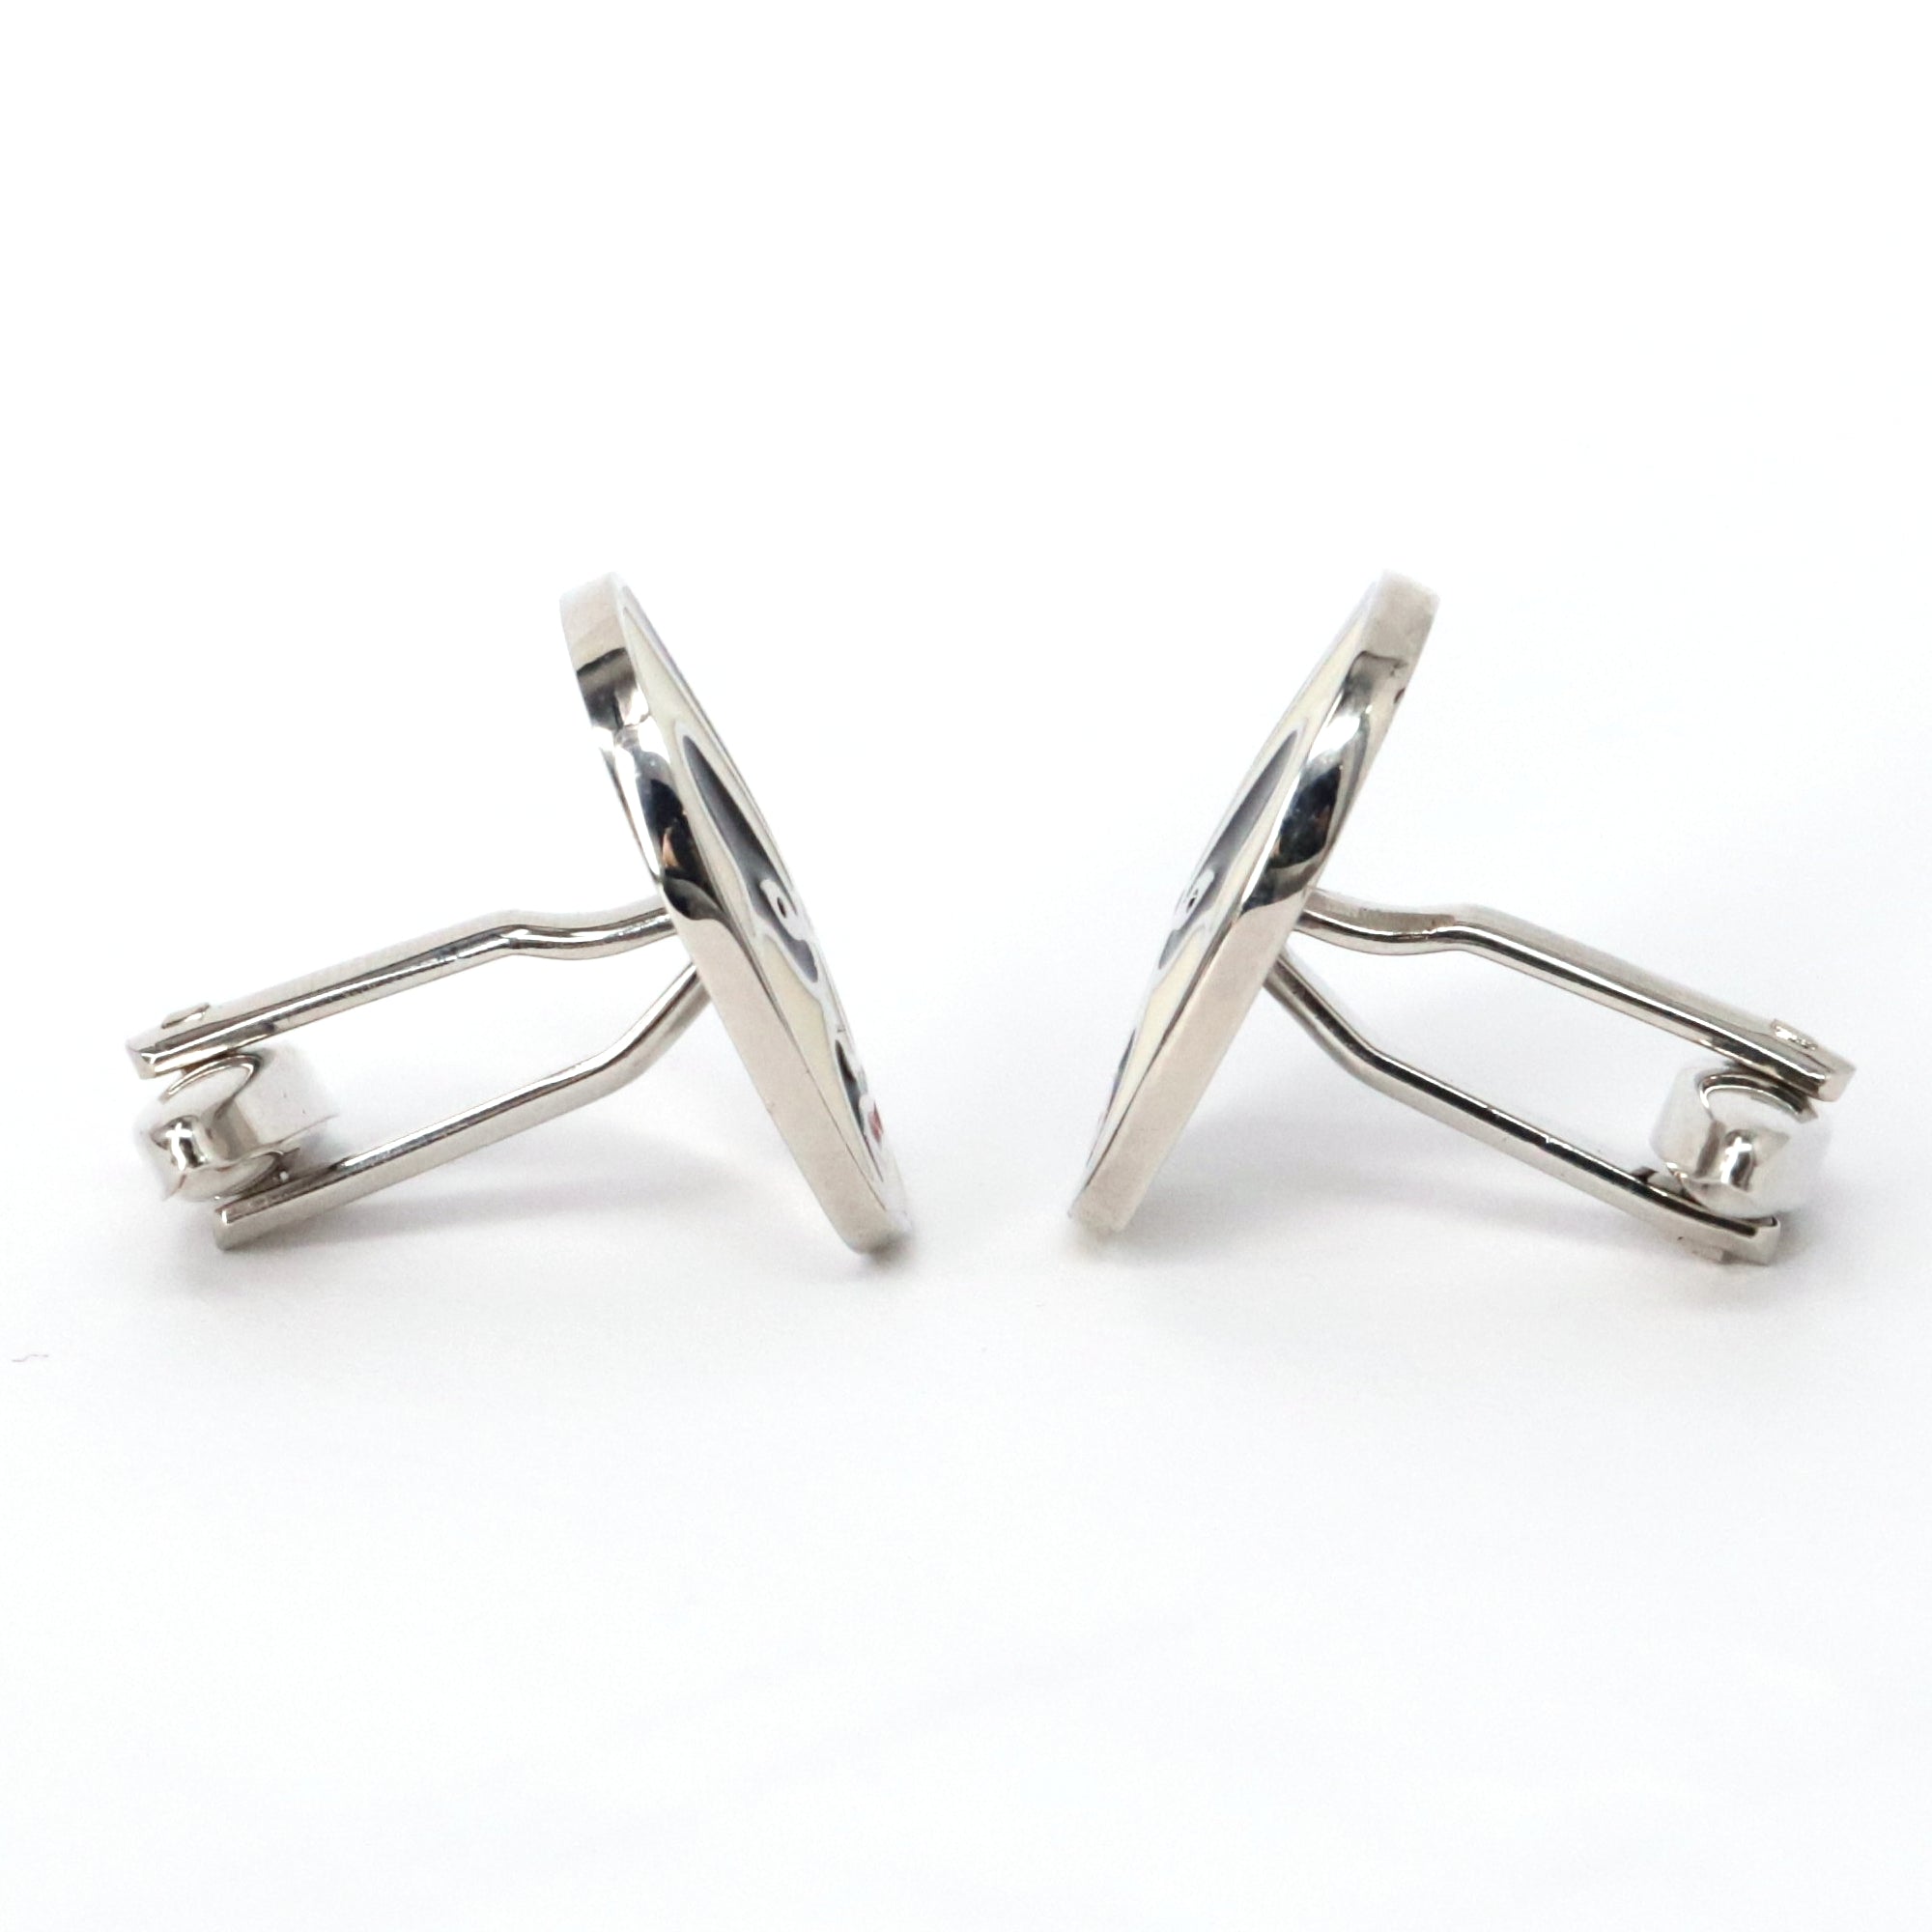 Jing Mask or Chinese Opera mask  white black Cufflinks (Online Exclusive)